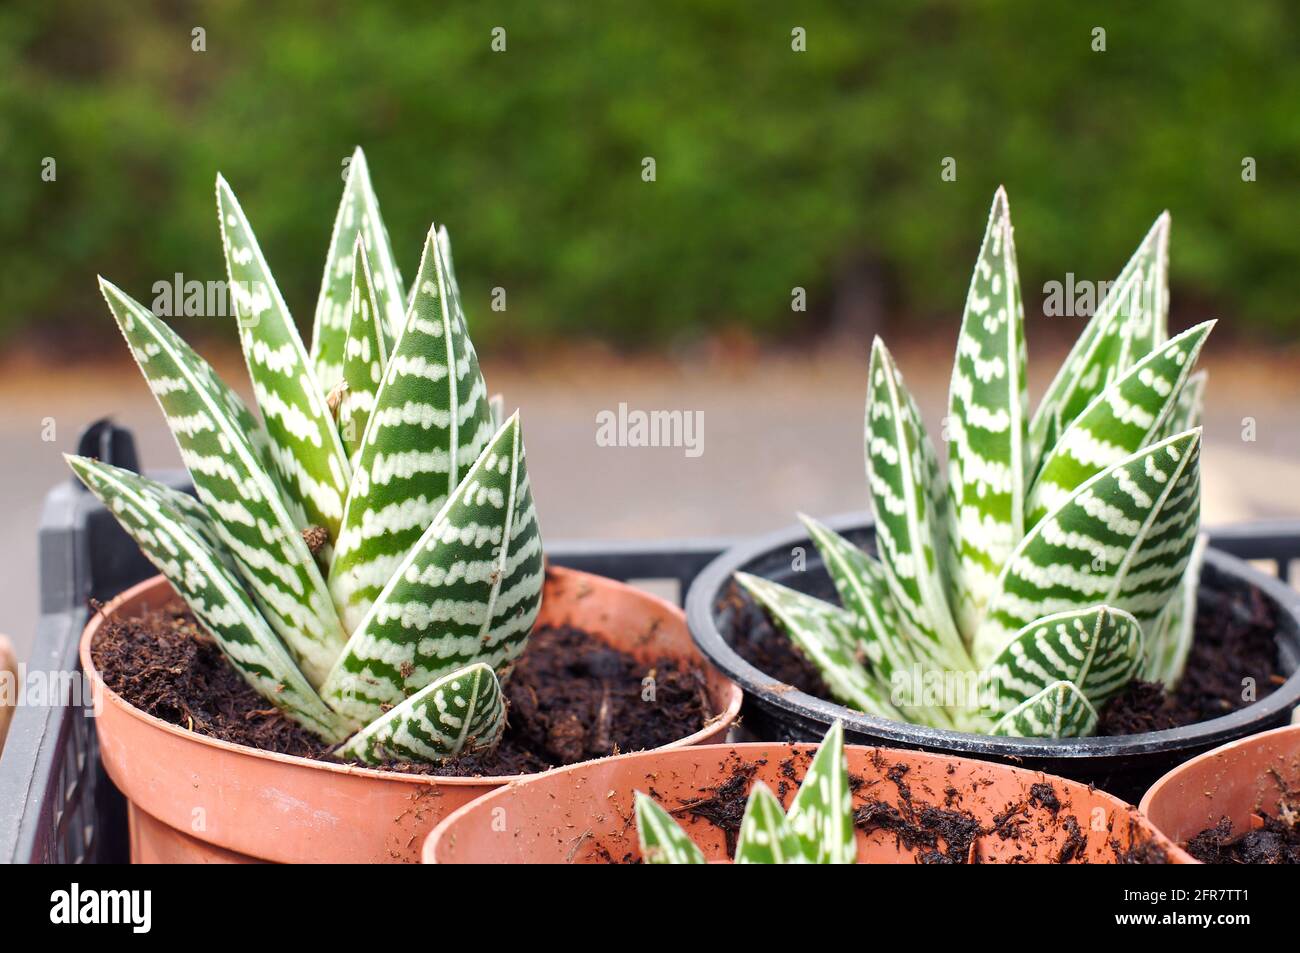 Close up of potted Aloe Vera plants with soft focus background Stock Photo